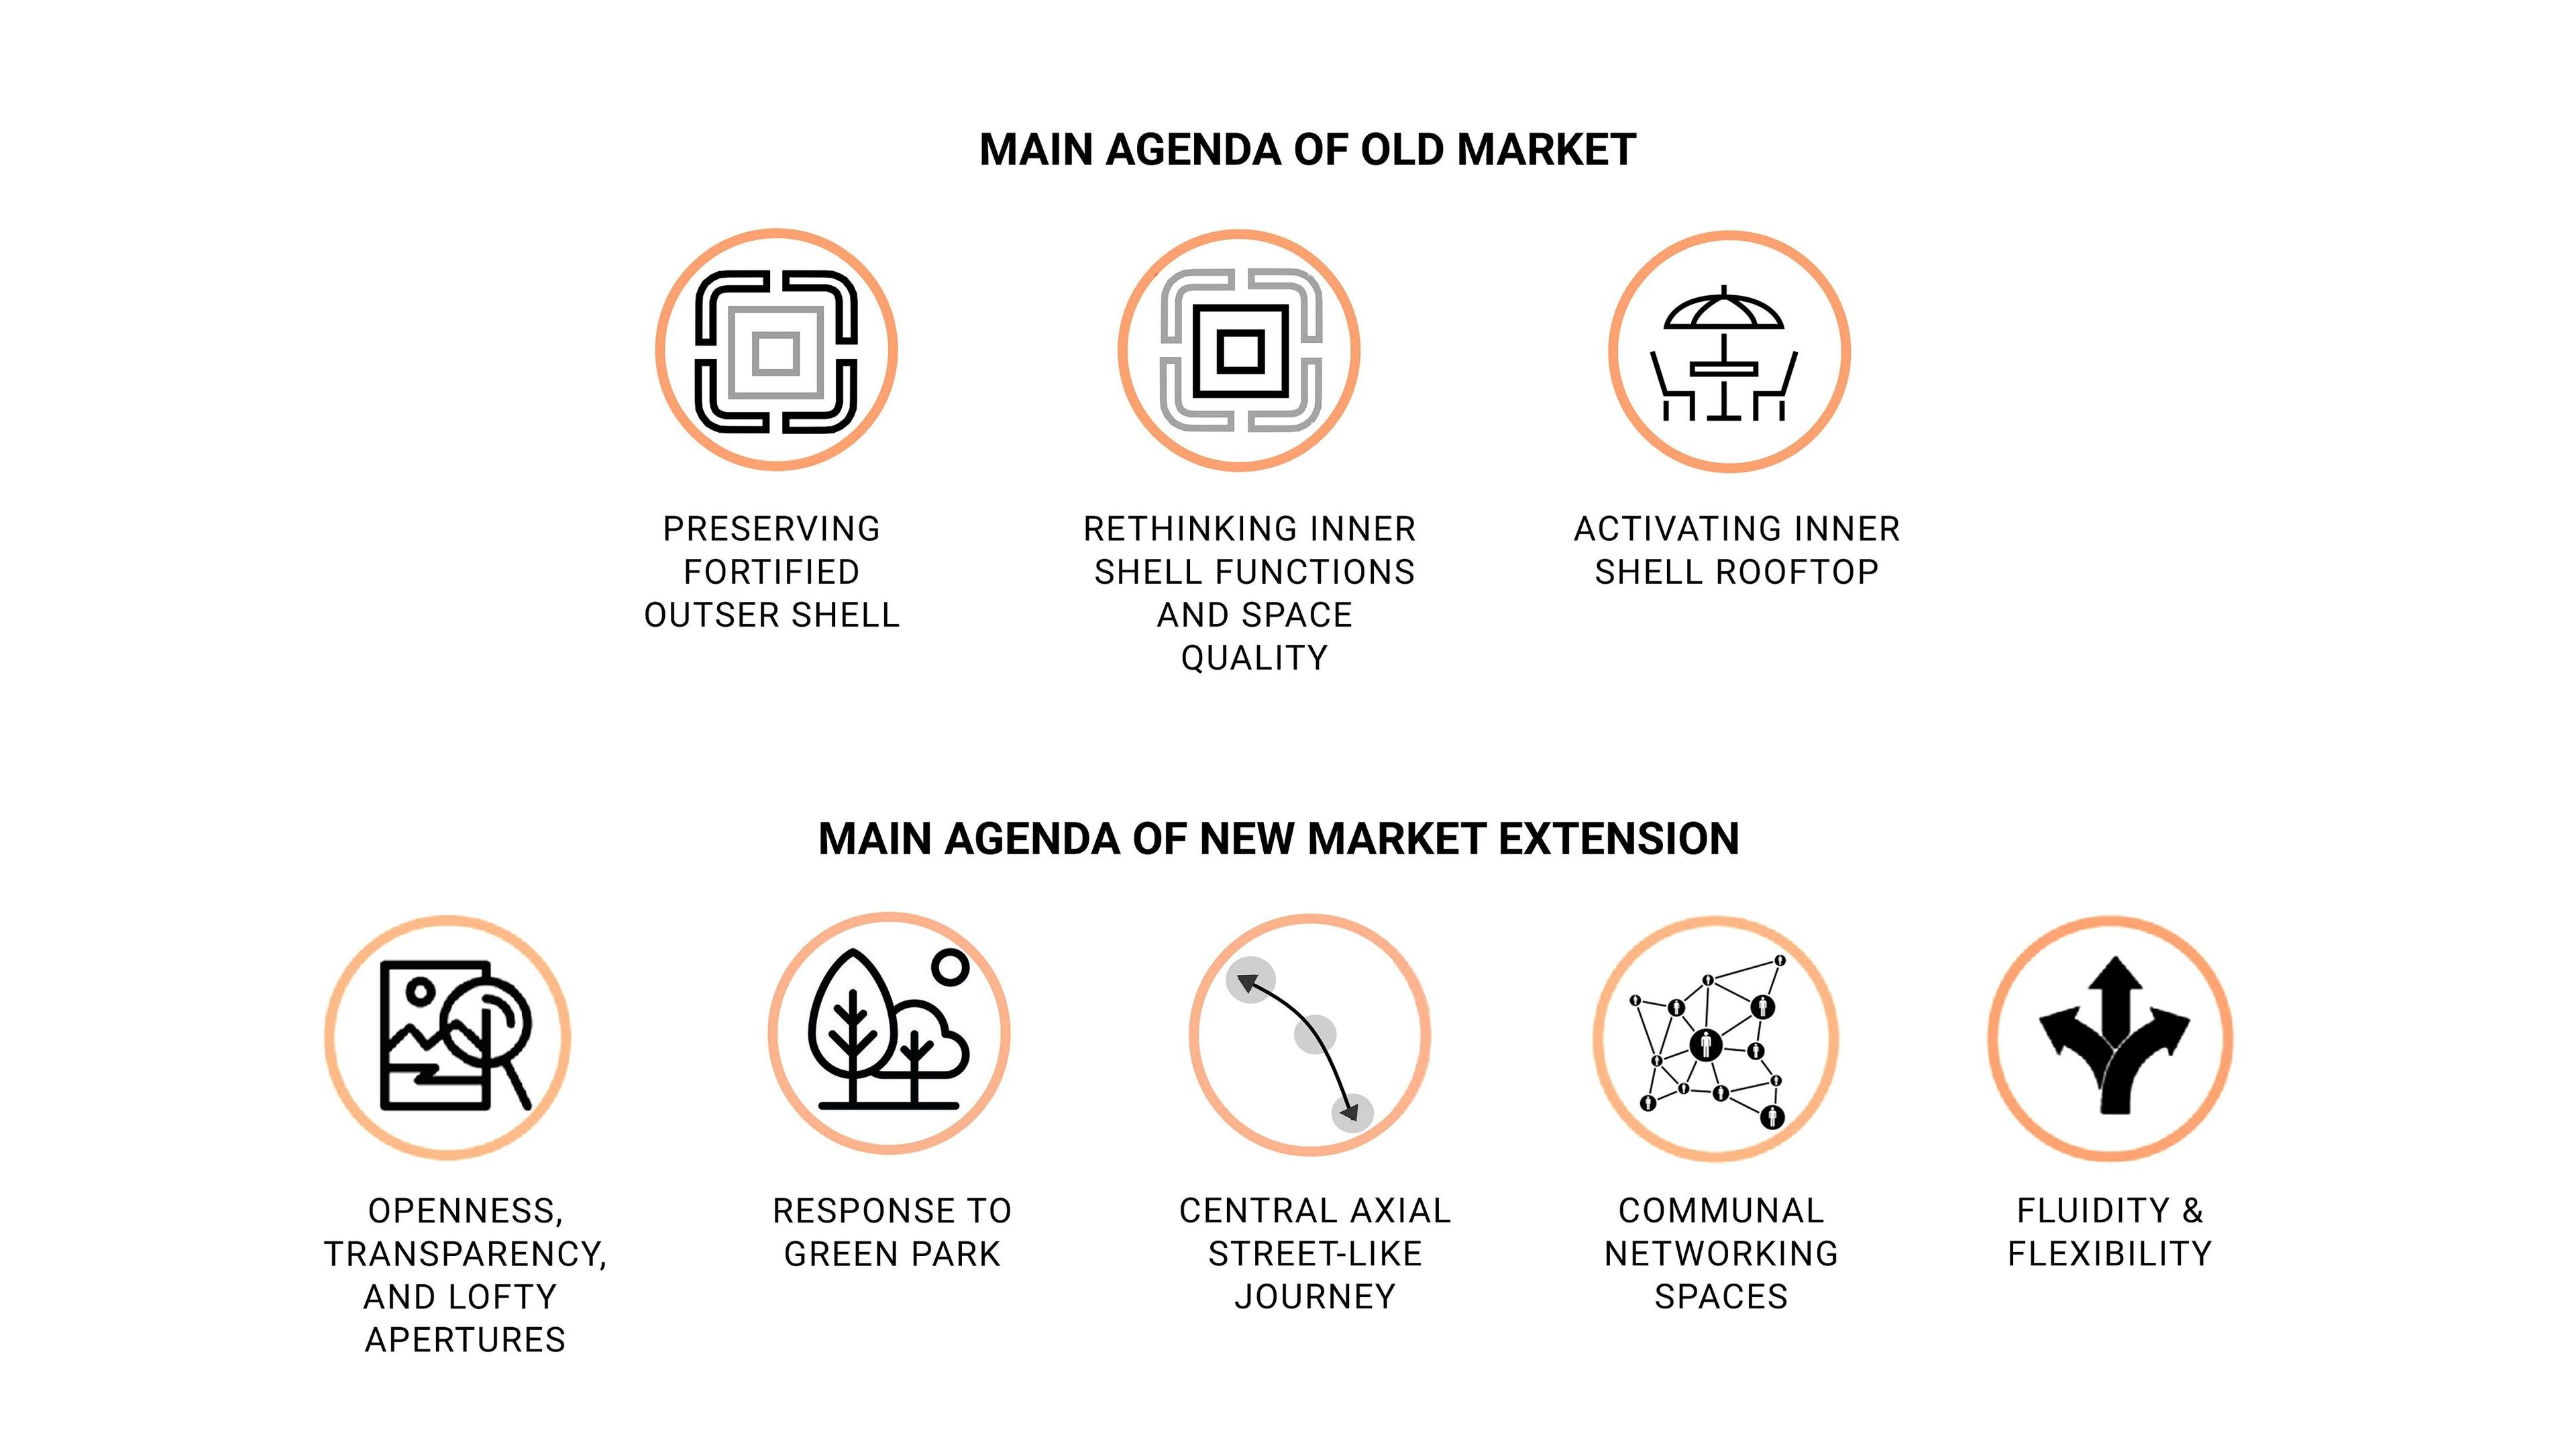 5. Main Agendas of Old and New Market